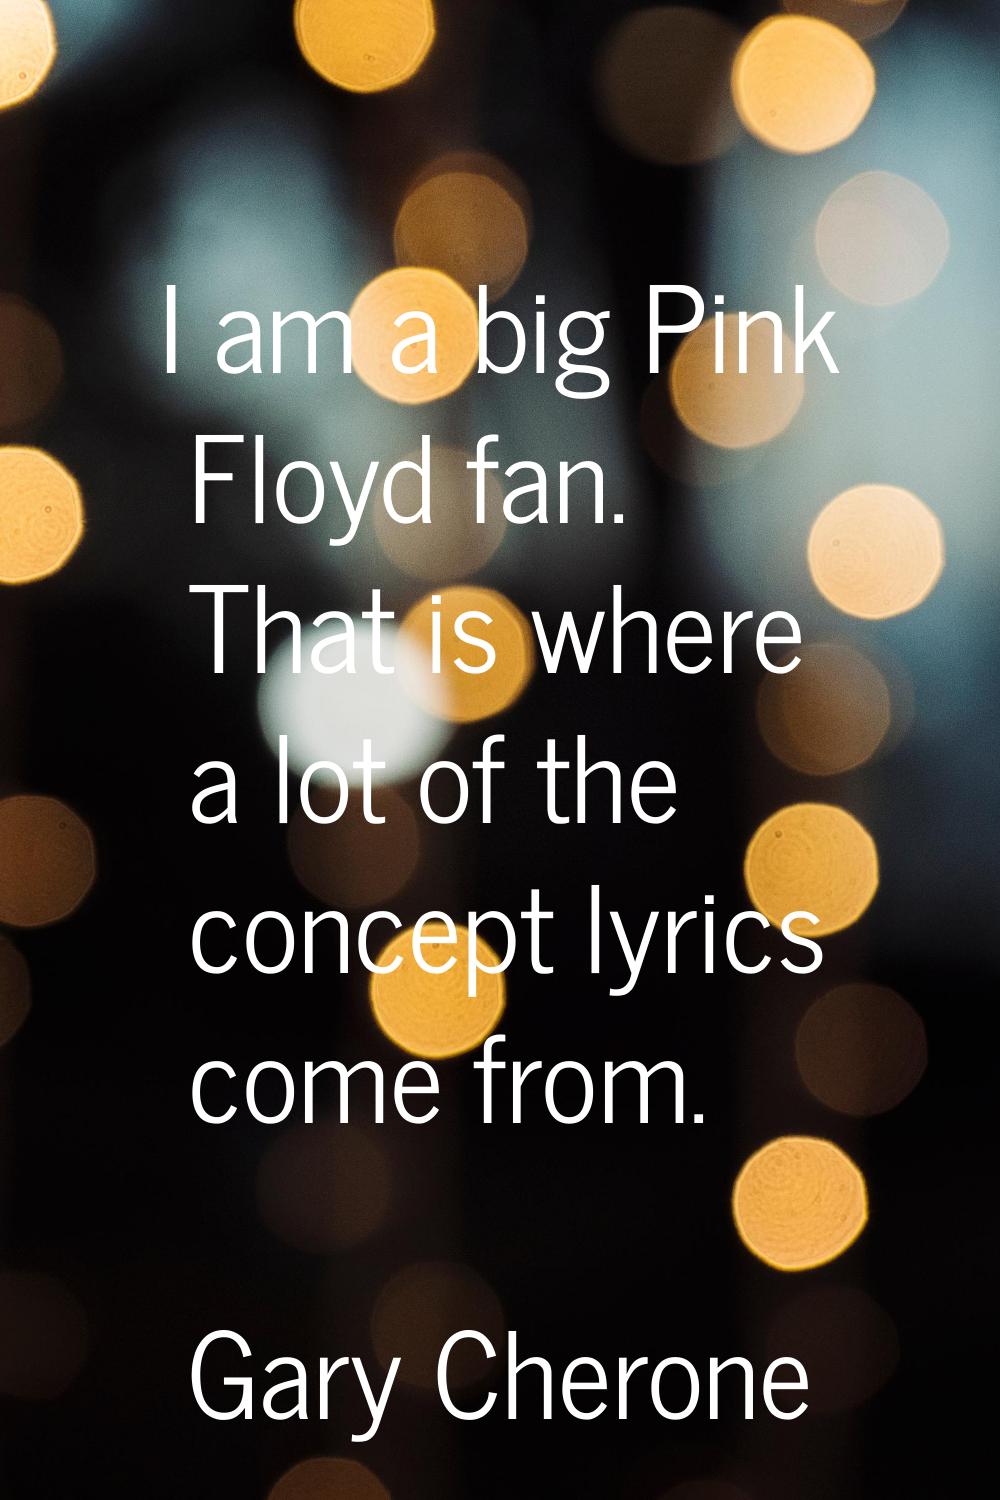 I am a big Pink Floyd fan. That is where a lot of the concept lyrics come from.